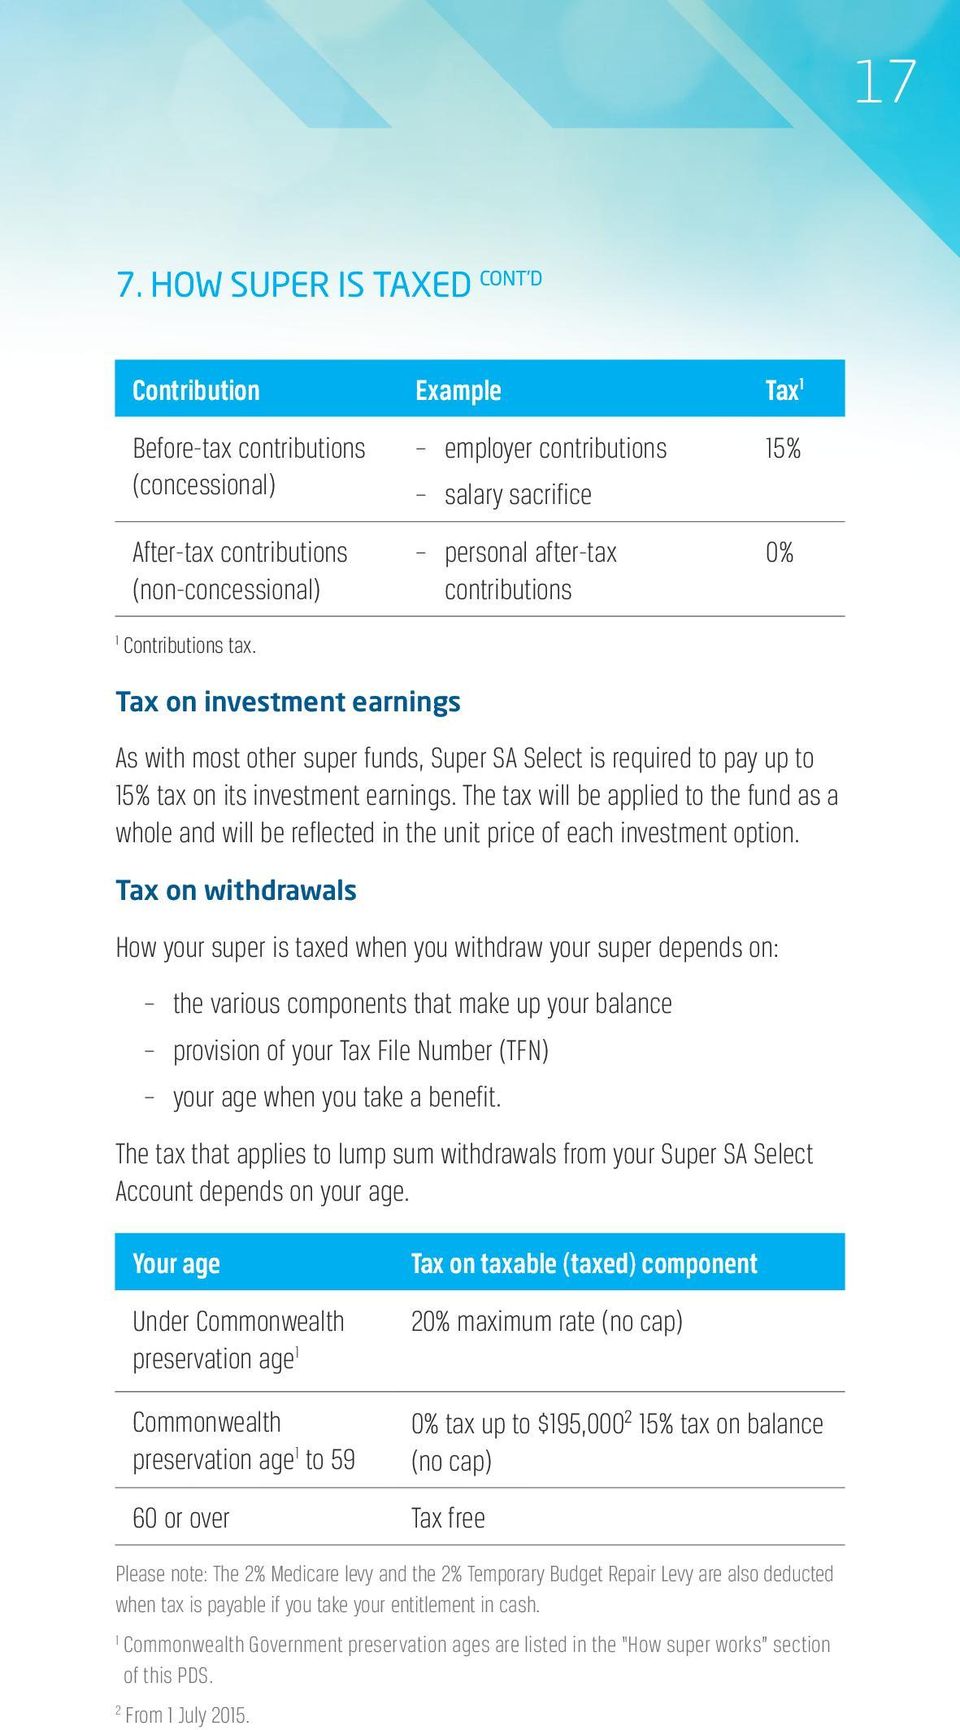 investment earnings. The tax will be applied to the fund as a whole and will be reflected in the unit price of each investment option.